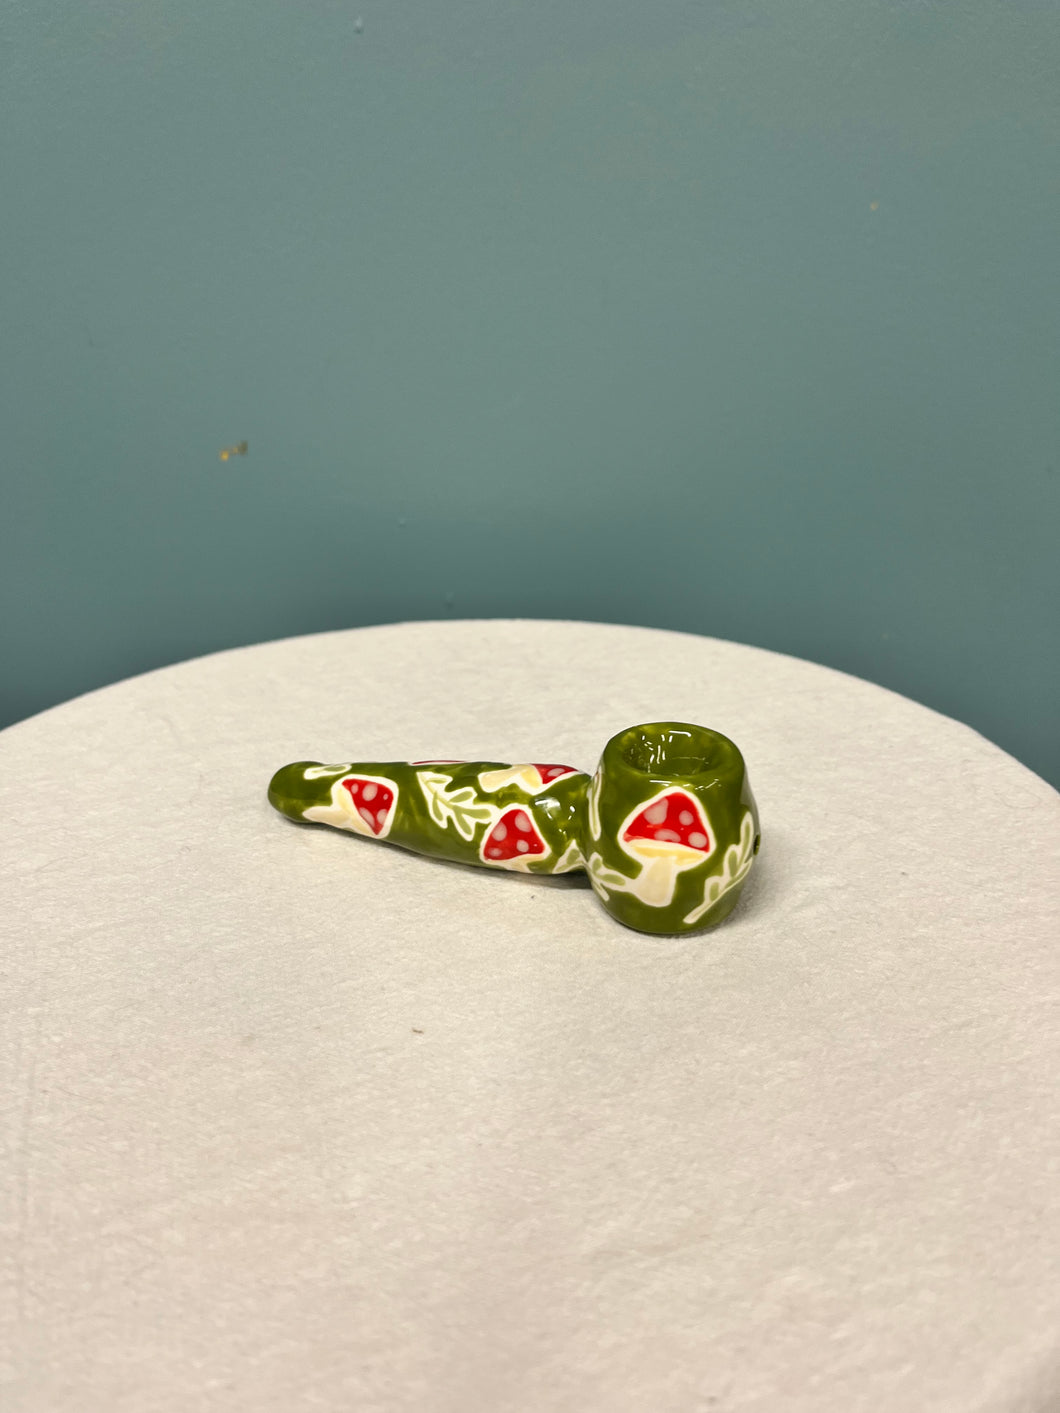 Hand painted Mushroom and Leaf Pipe 420 gift